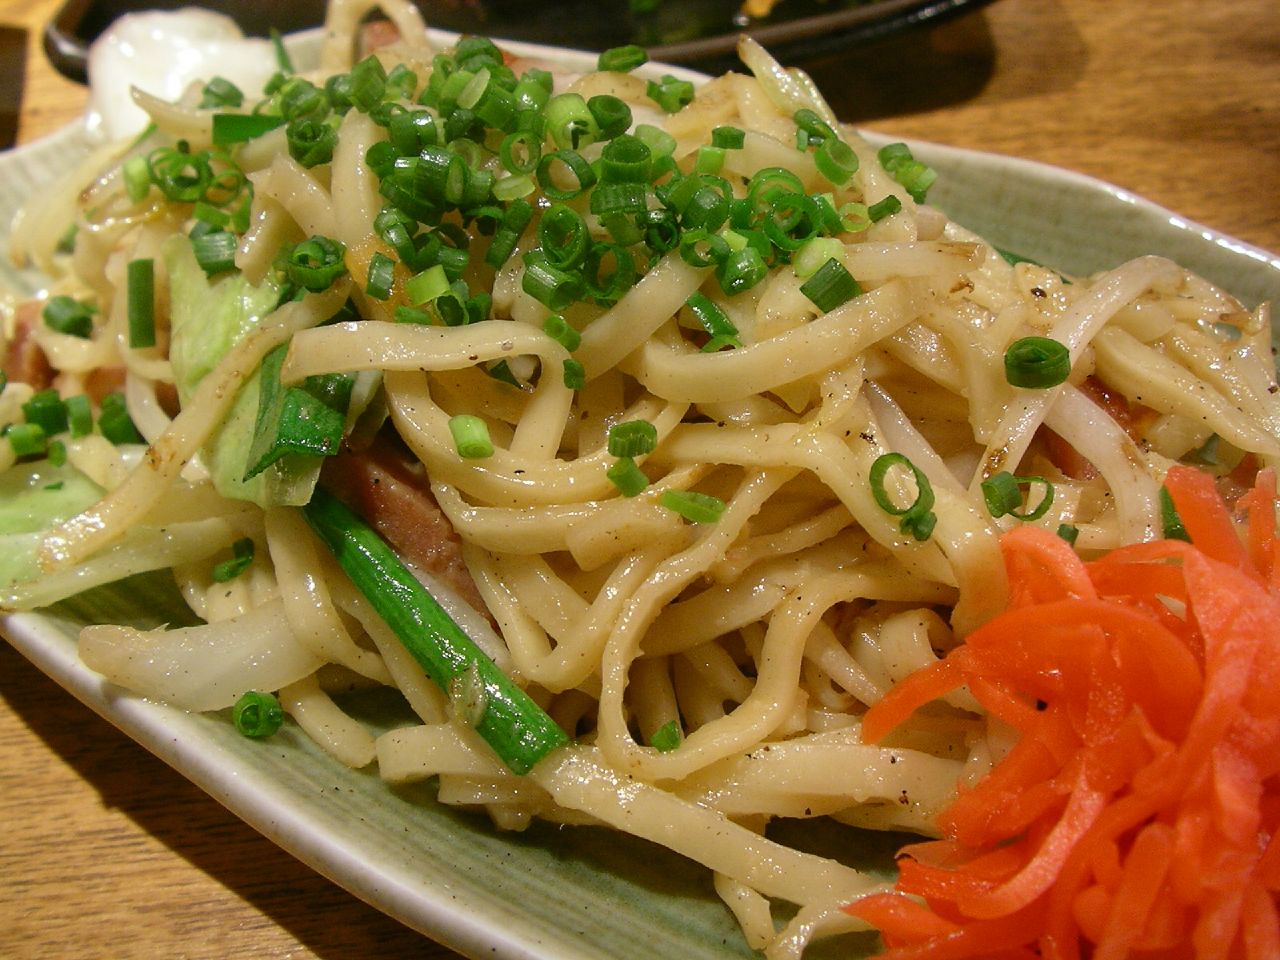 the plate of noodles is topped with meat, scallions and green onions